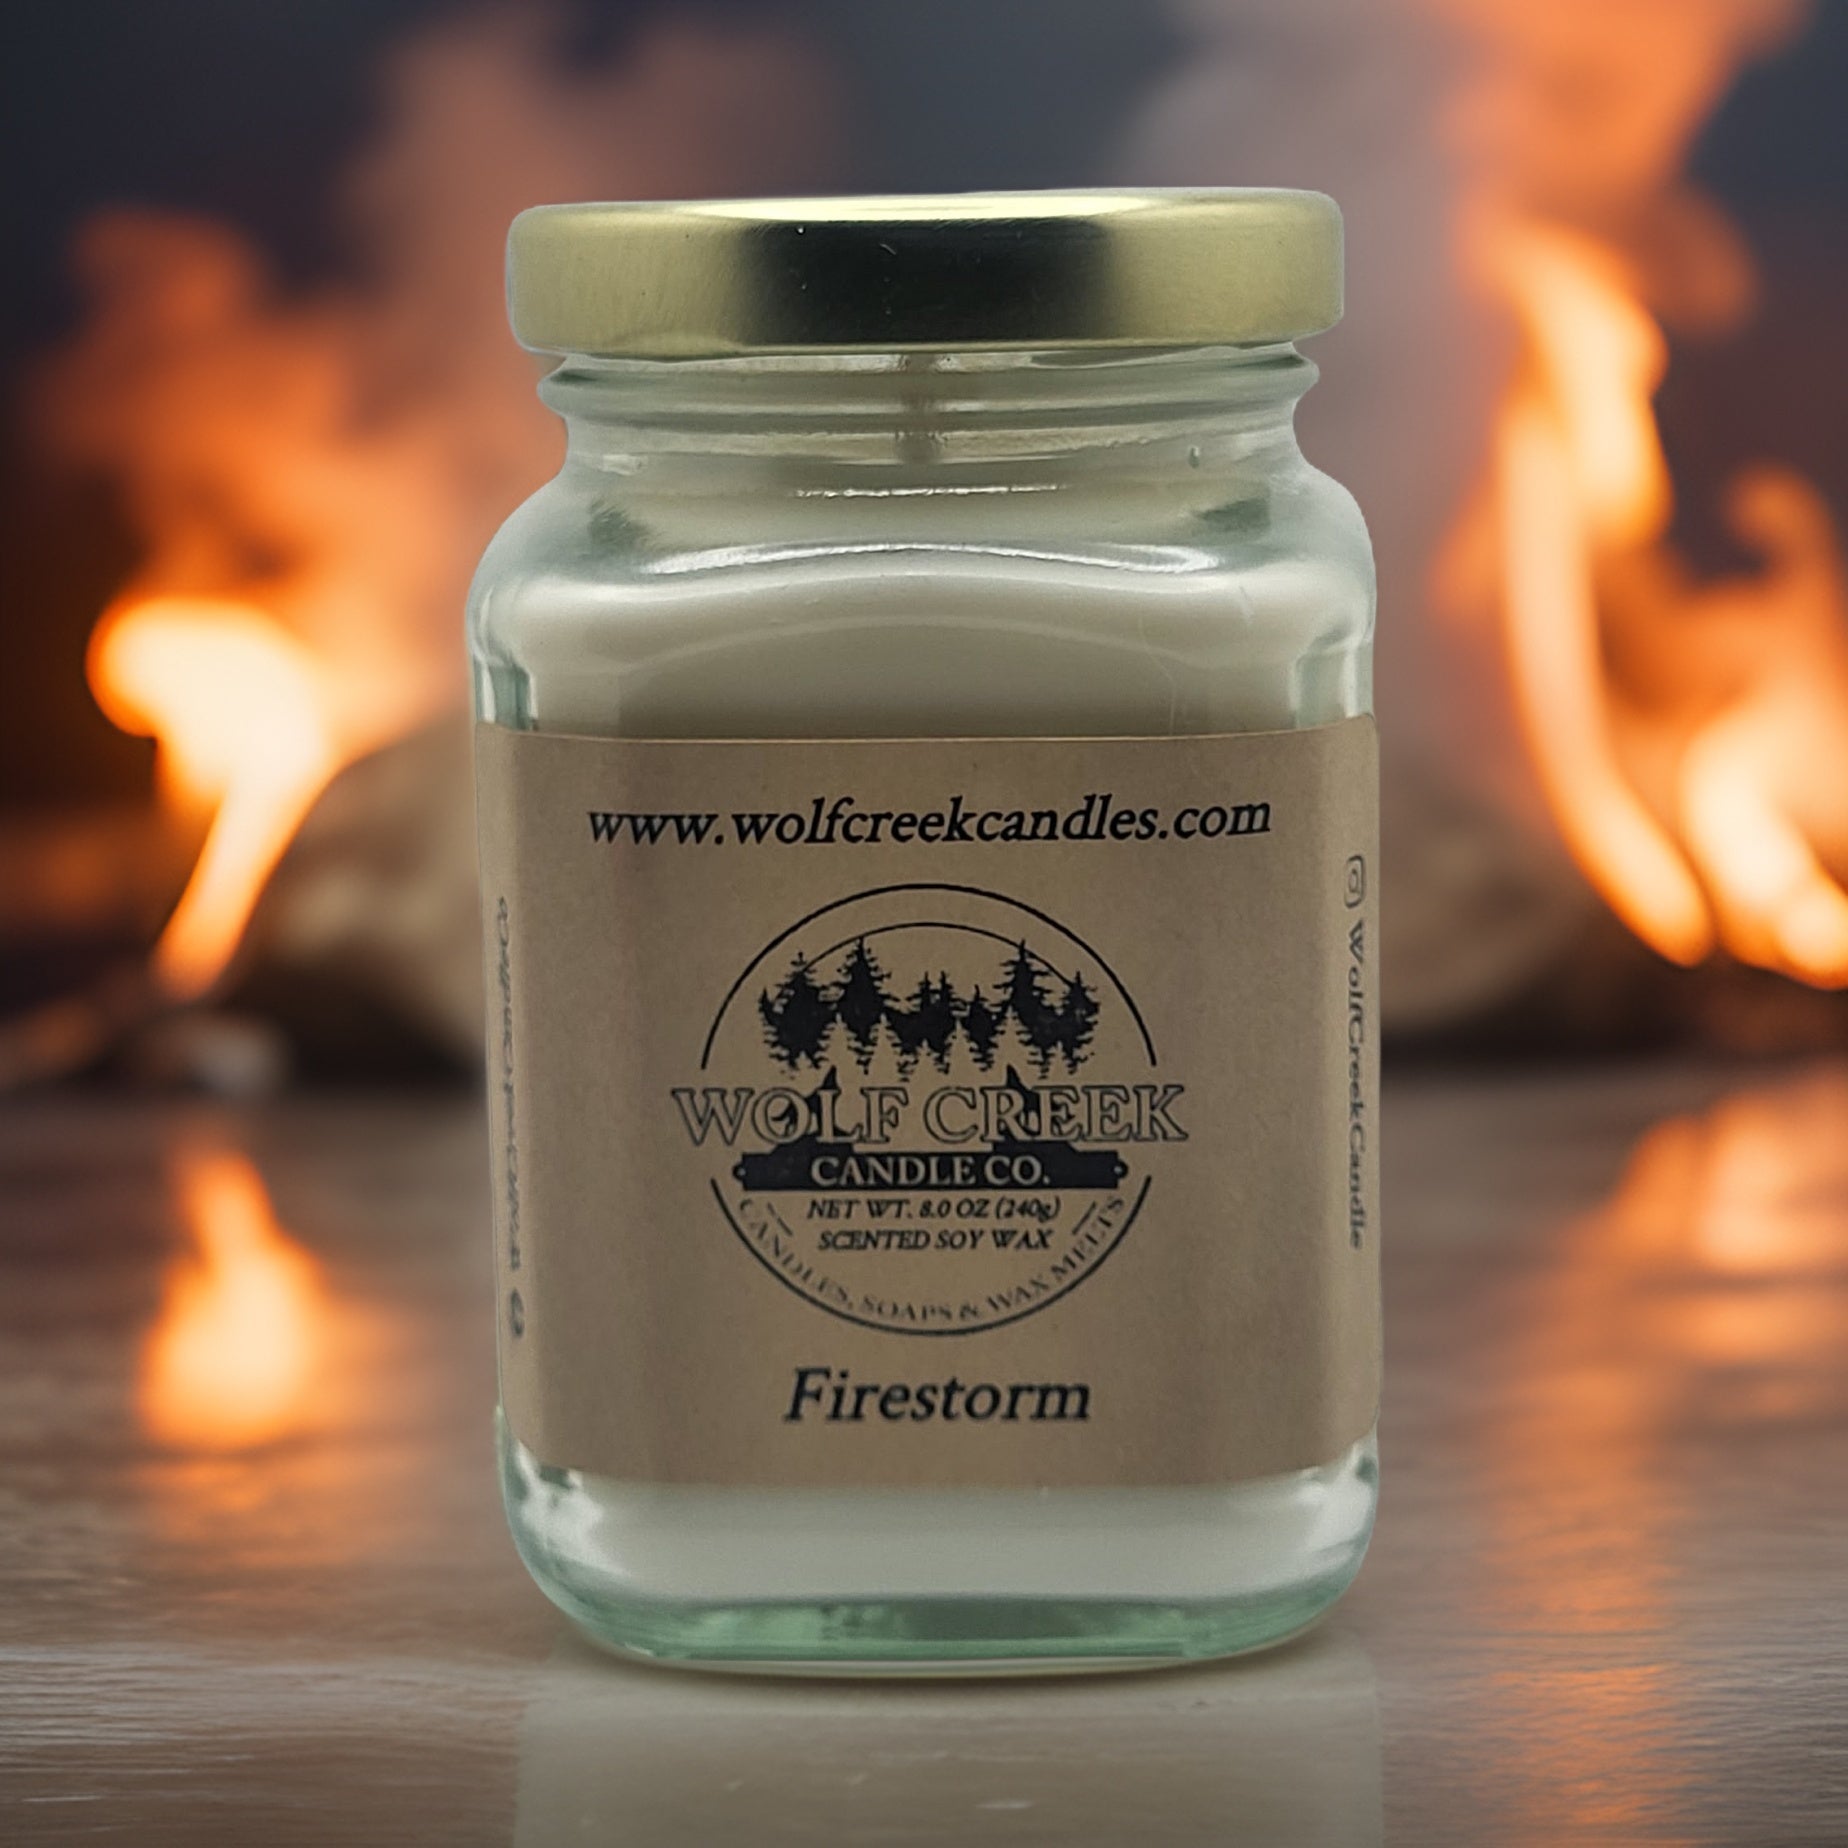 Firestorm Soy Candle - Wolf Creek Candle Co.